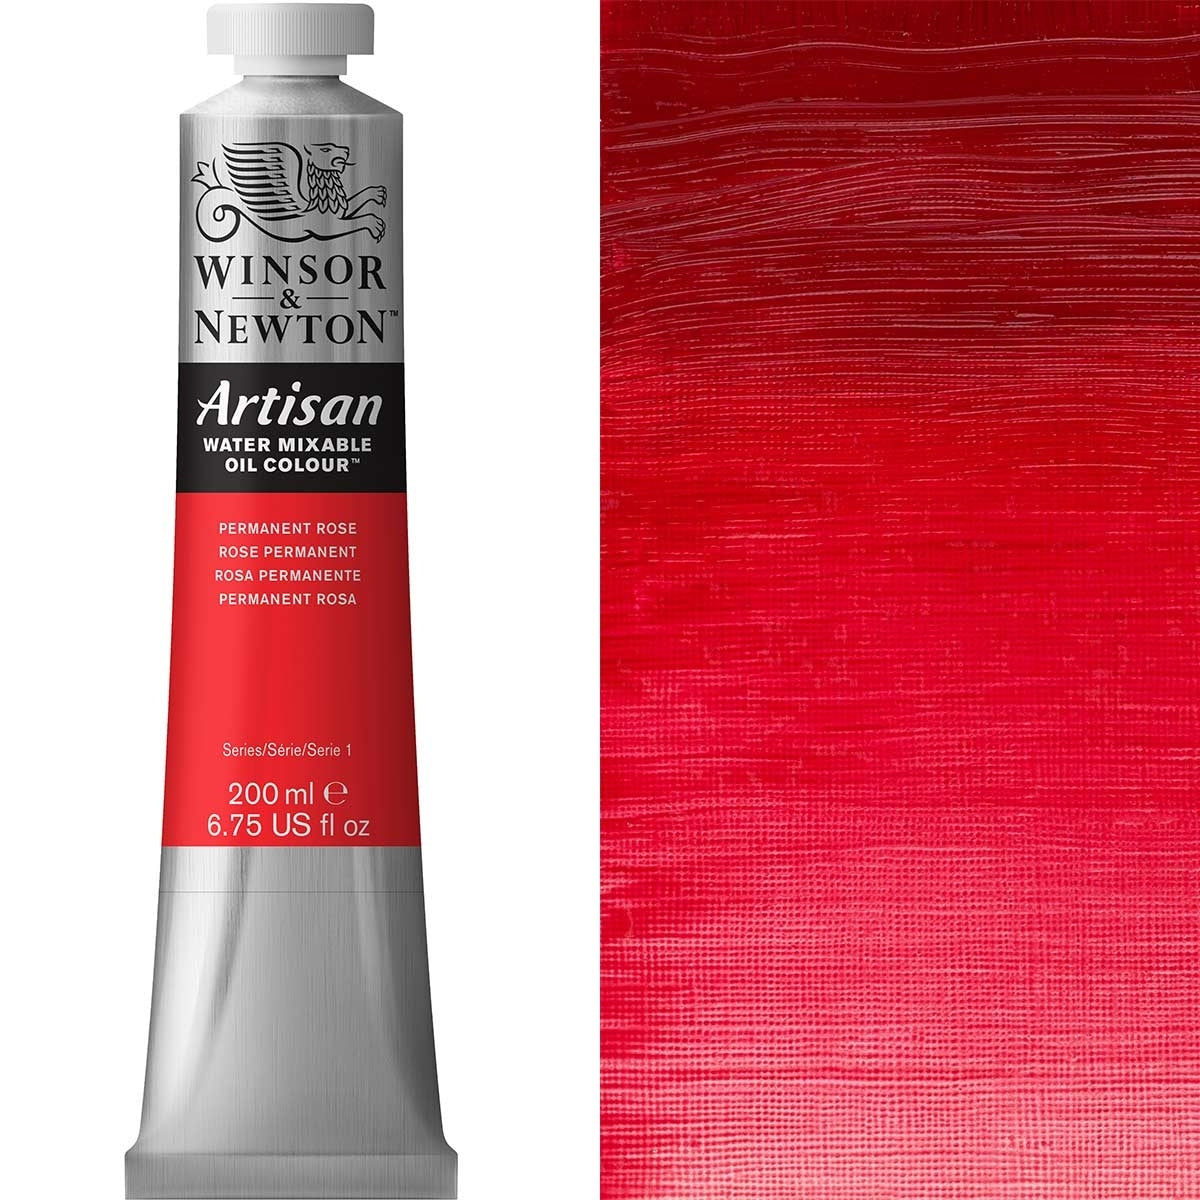 Winsor and Newton - Artisan Oil Colour Watermixable - 200ml - Permanent Rose